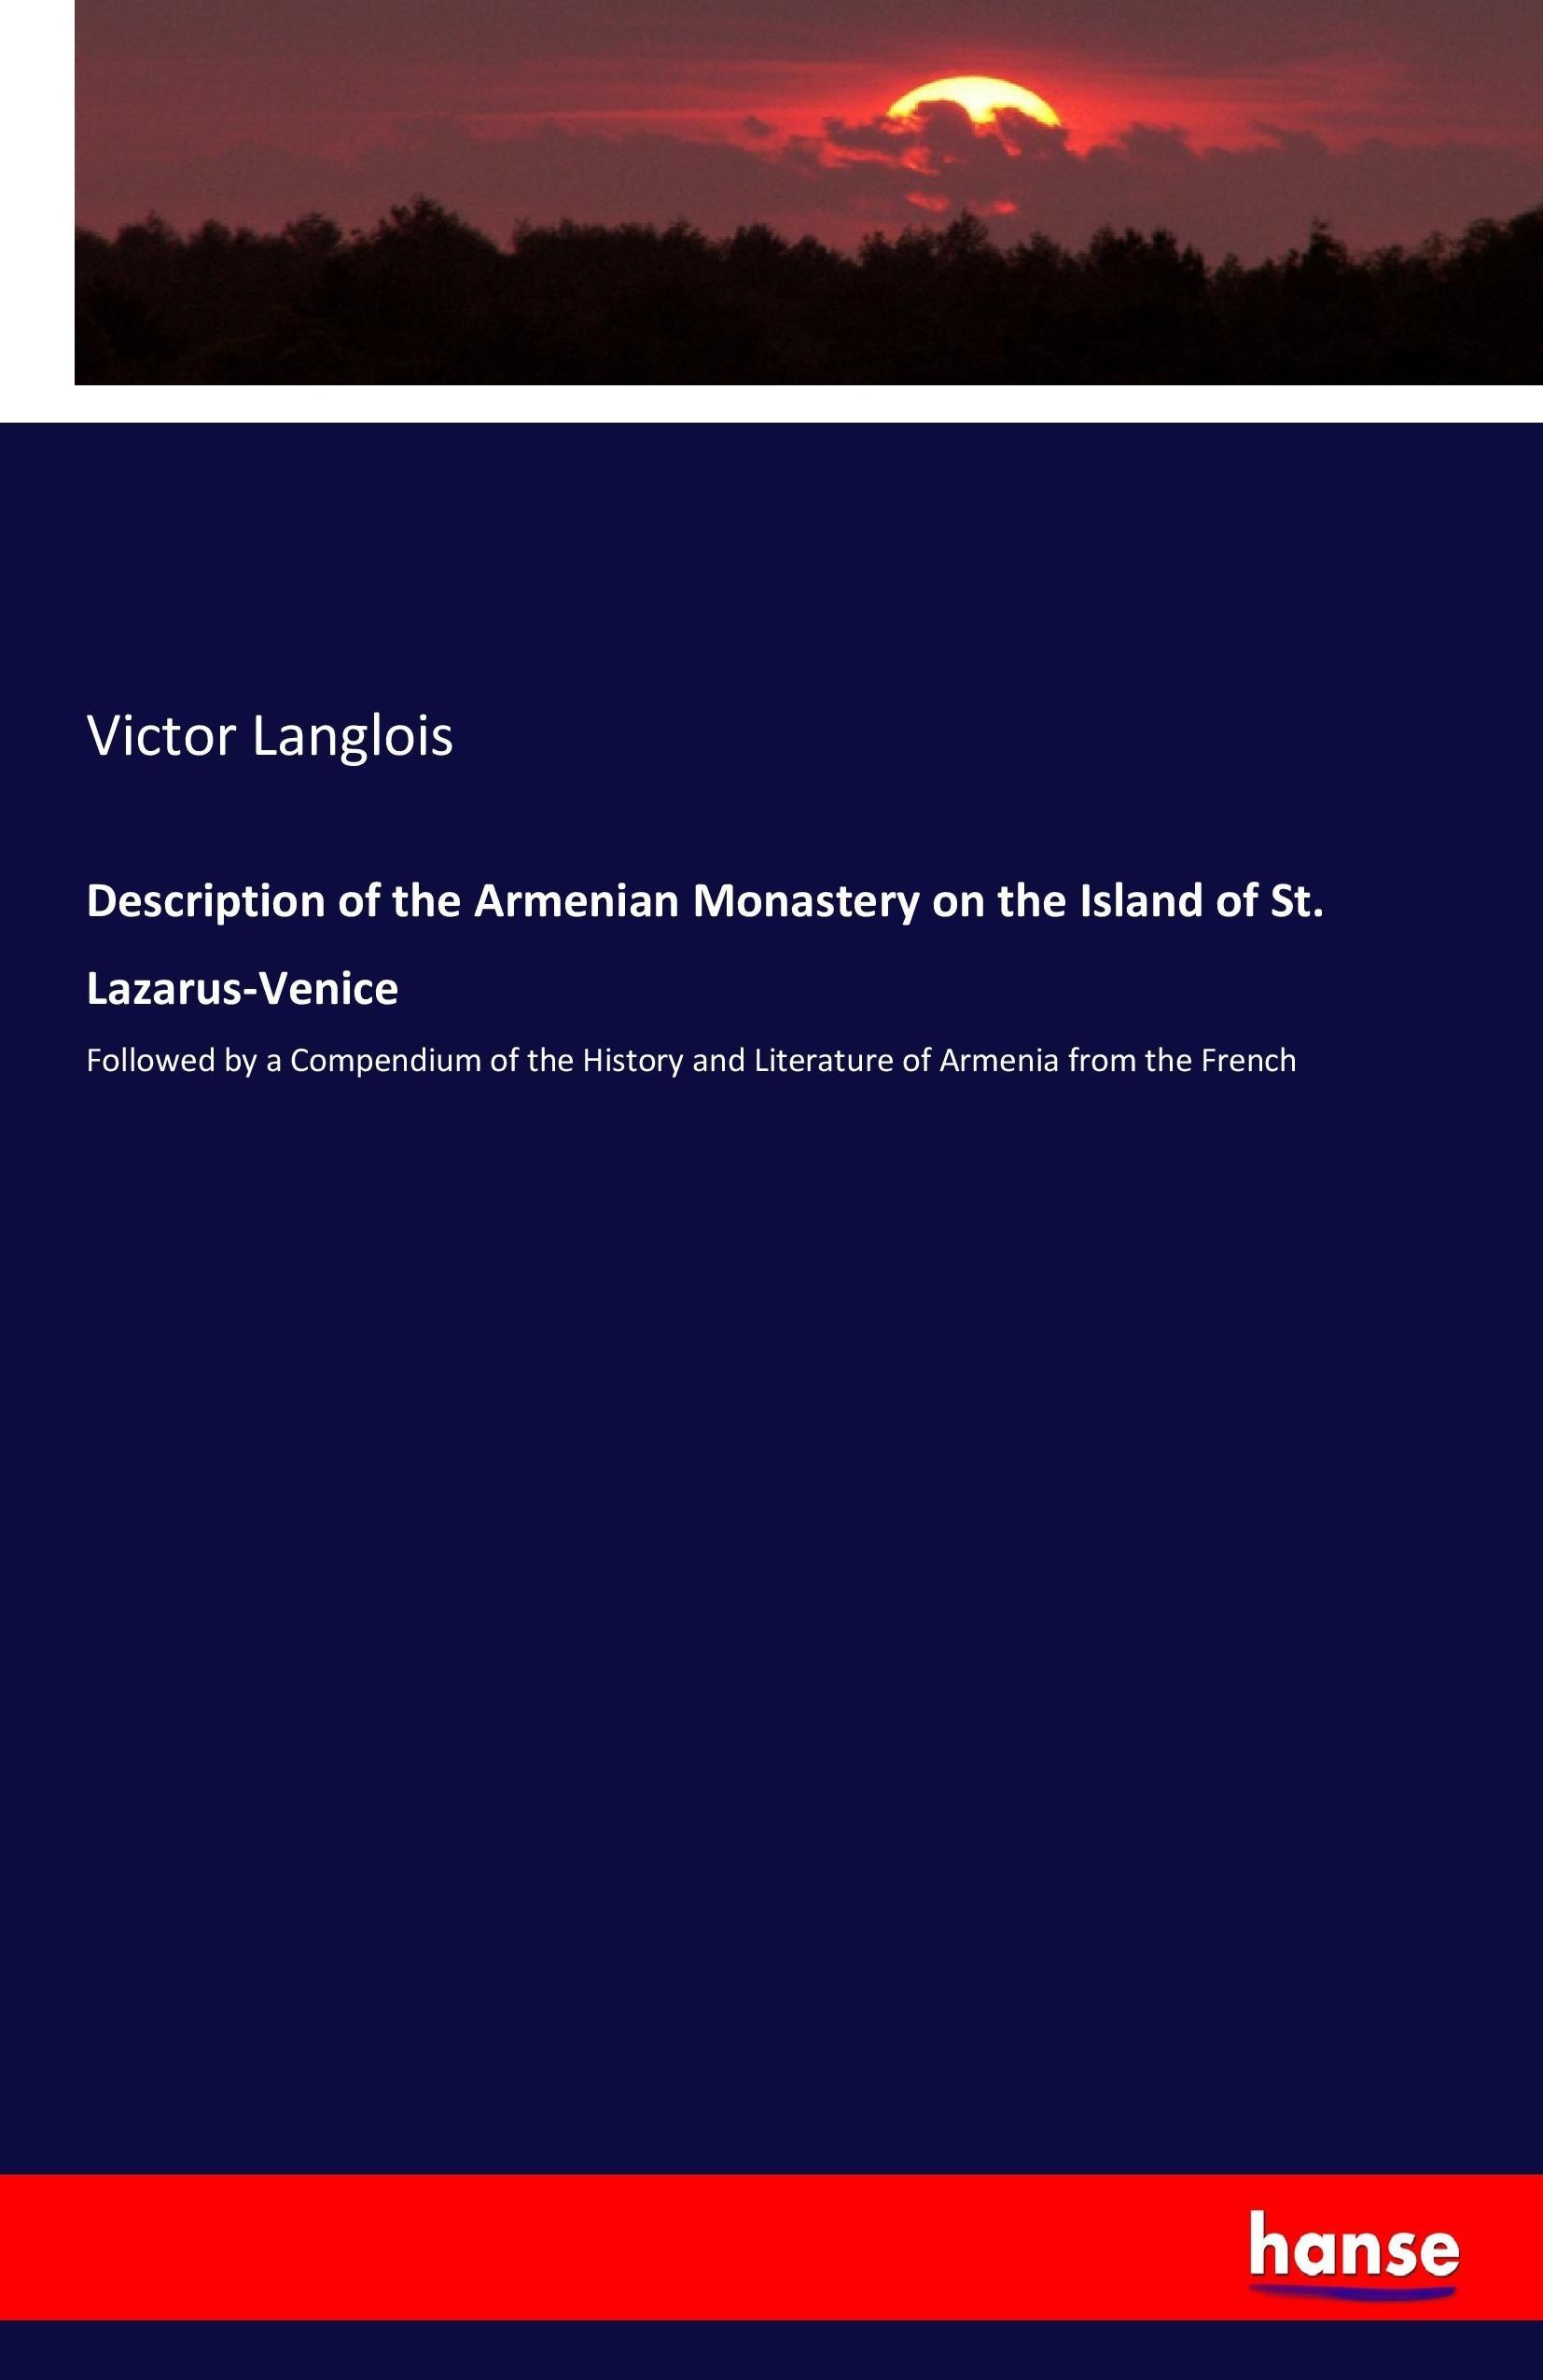 Description of the Armenian Monastery on the Island of St. Lazarus-Venice | Followed by a Compendium of the History and Literature of Armenia from the French | Victor Langlois | Taschenbuch | 116 S. - Langlois, Victor